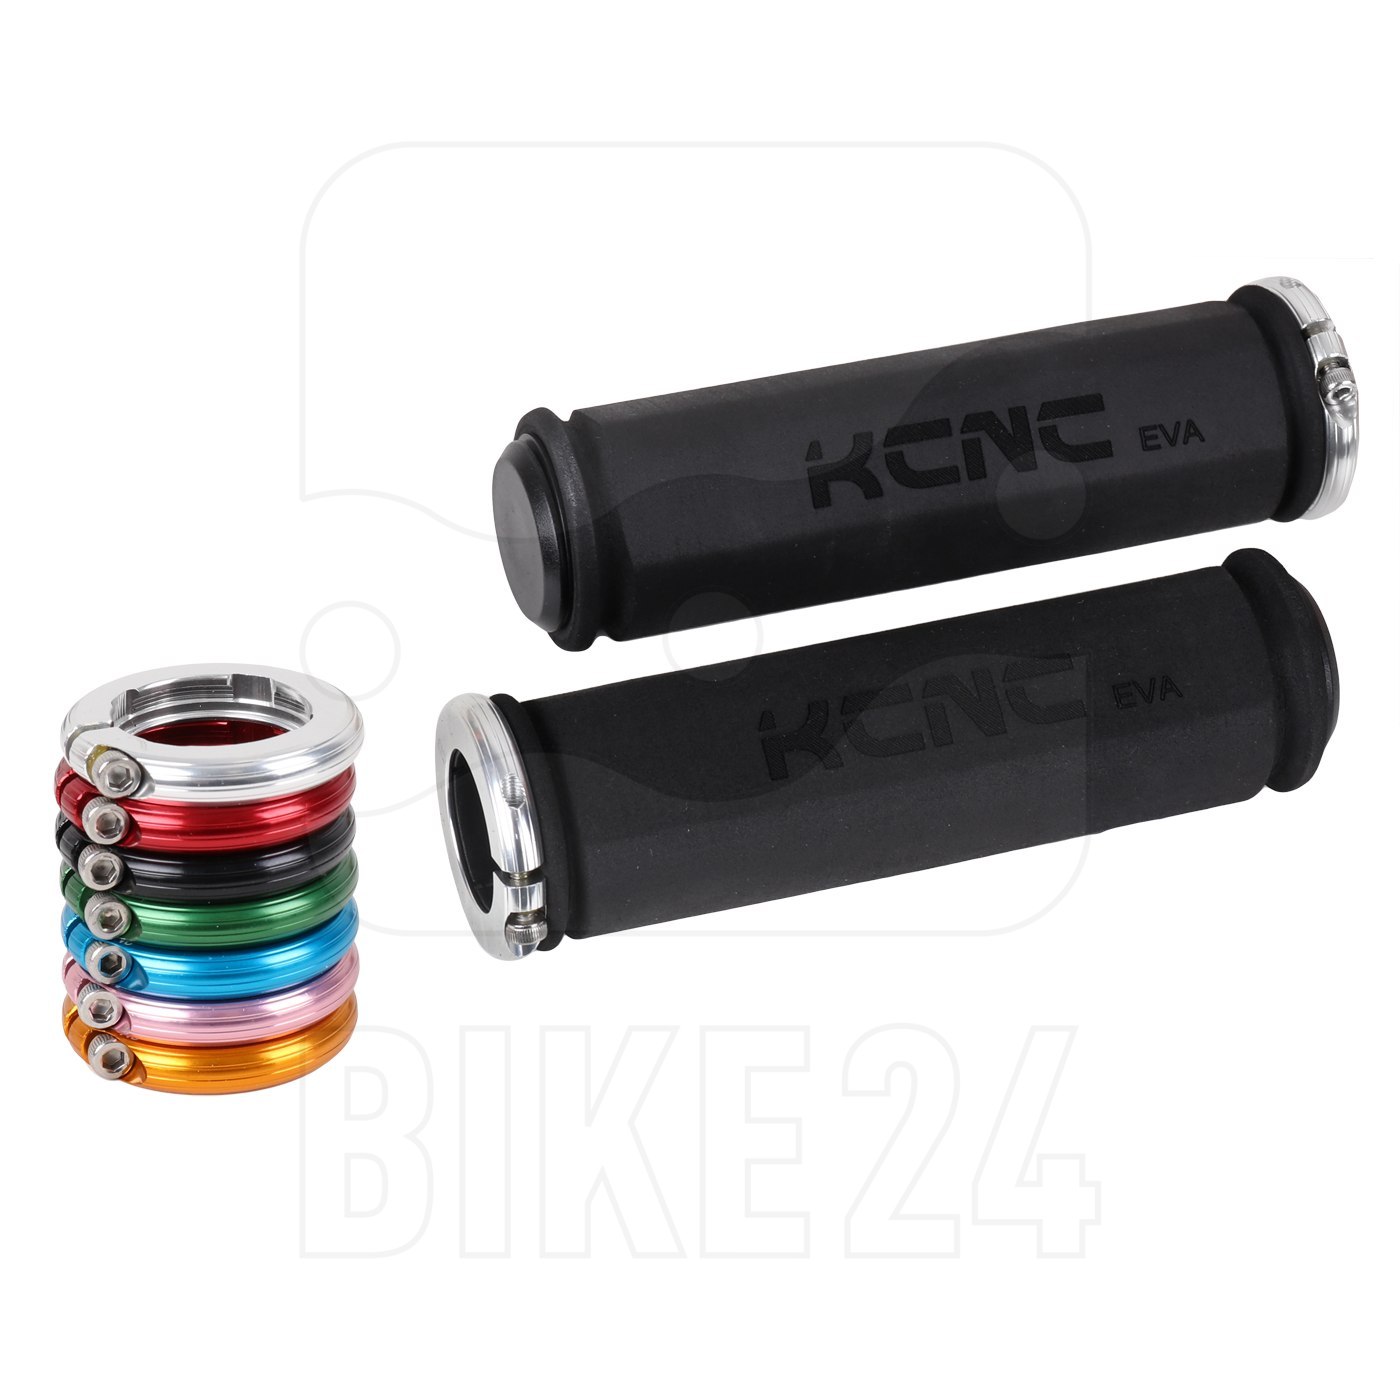 Image of KCNC Lock-on Bar Grips with Lockring - black/colored